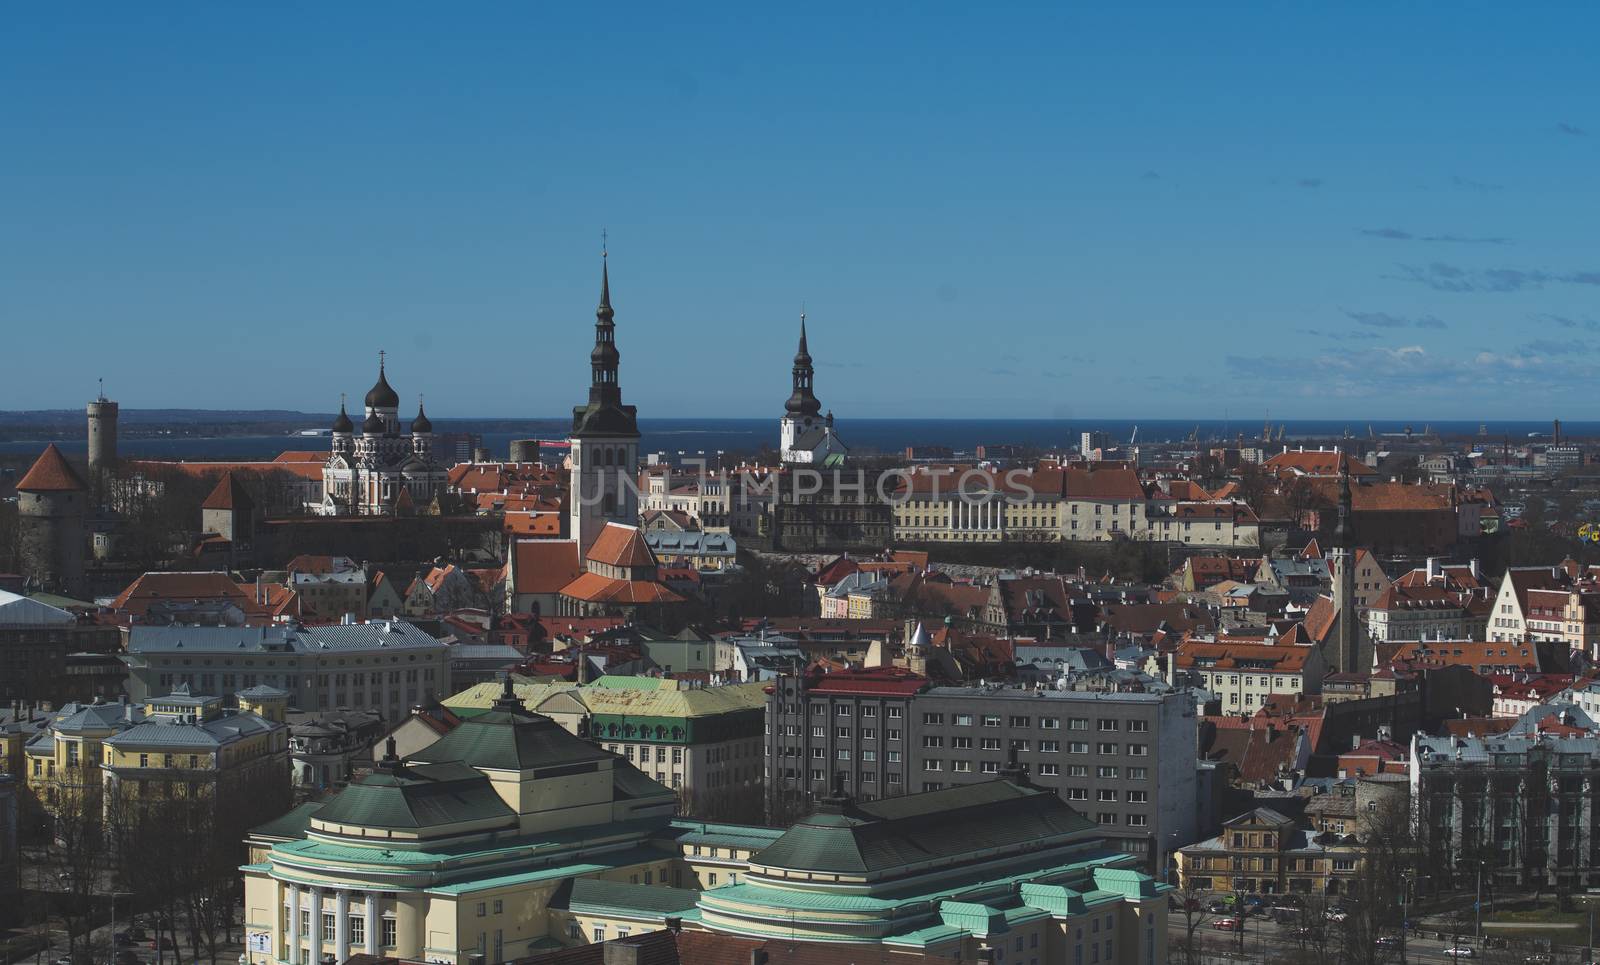 21 April 2018 Tallinn, Estonia. View of the Old town from the observation deck